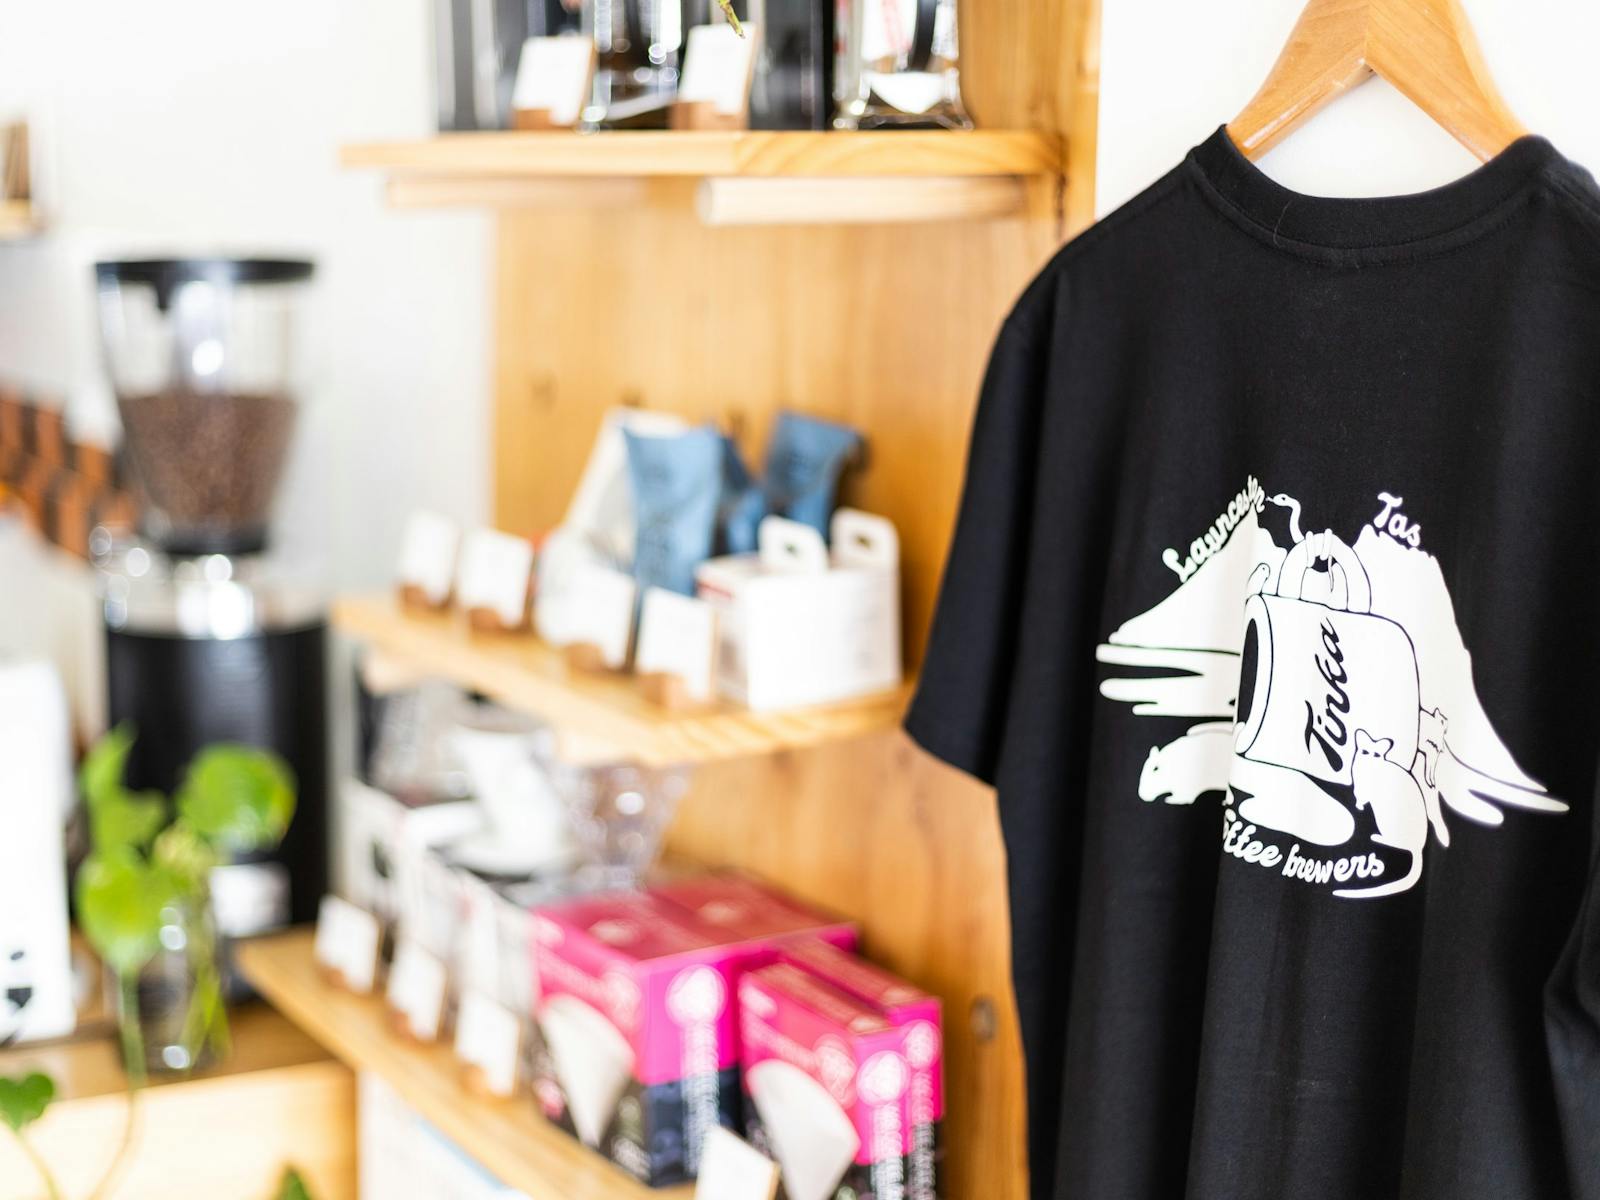 A black Tinka tee in the front of the frame and shelves full of coffee making equiptment in the back